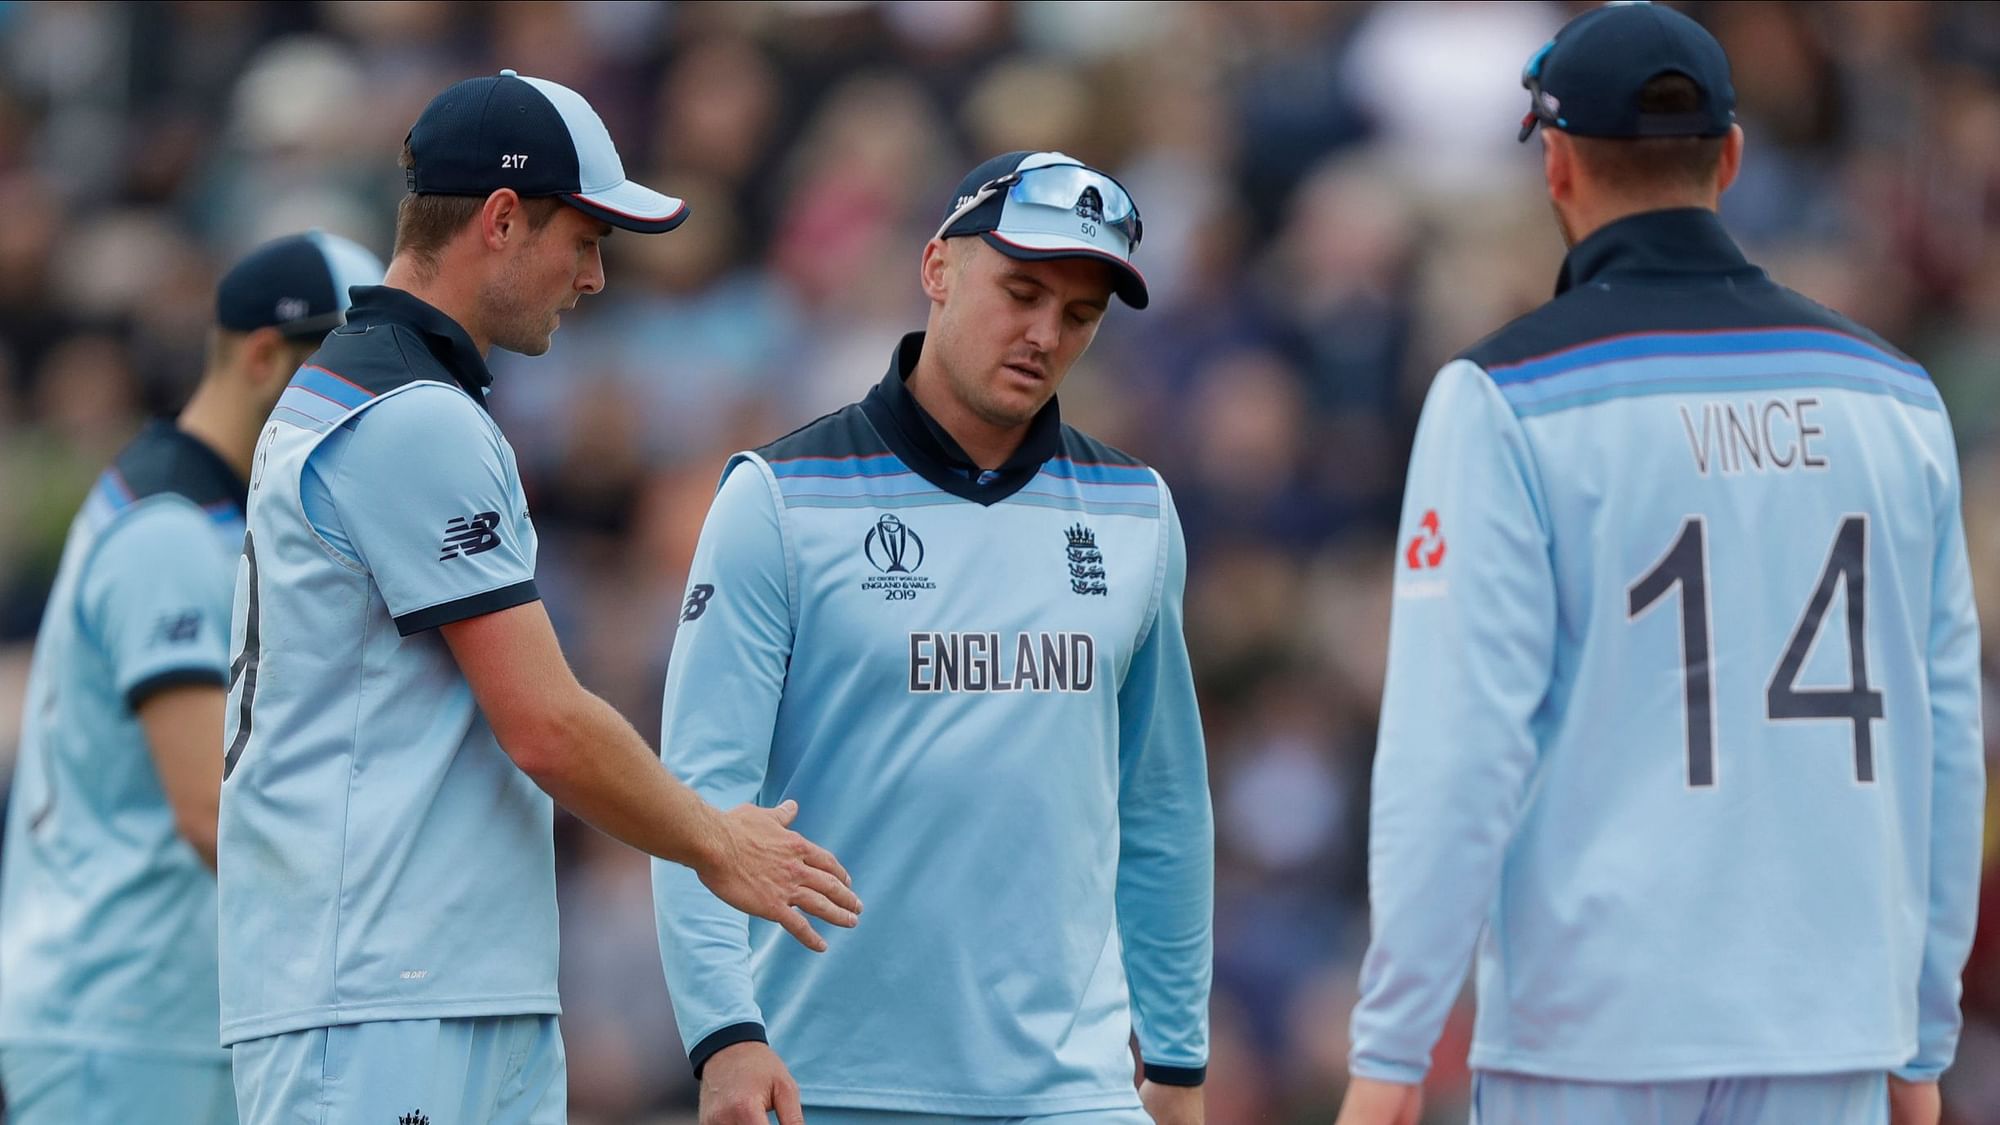 Jason Roy will not play England’s big match against Australia at the Lord’s today. 